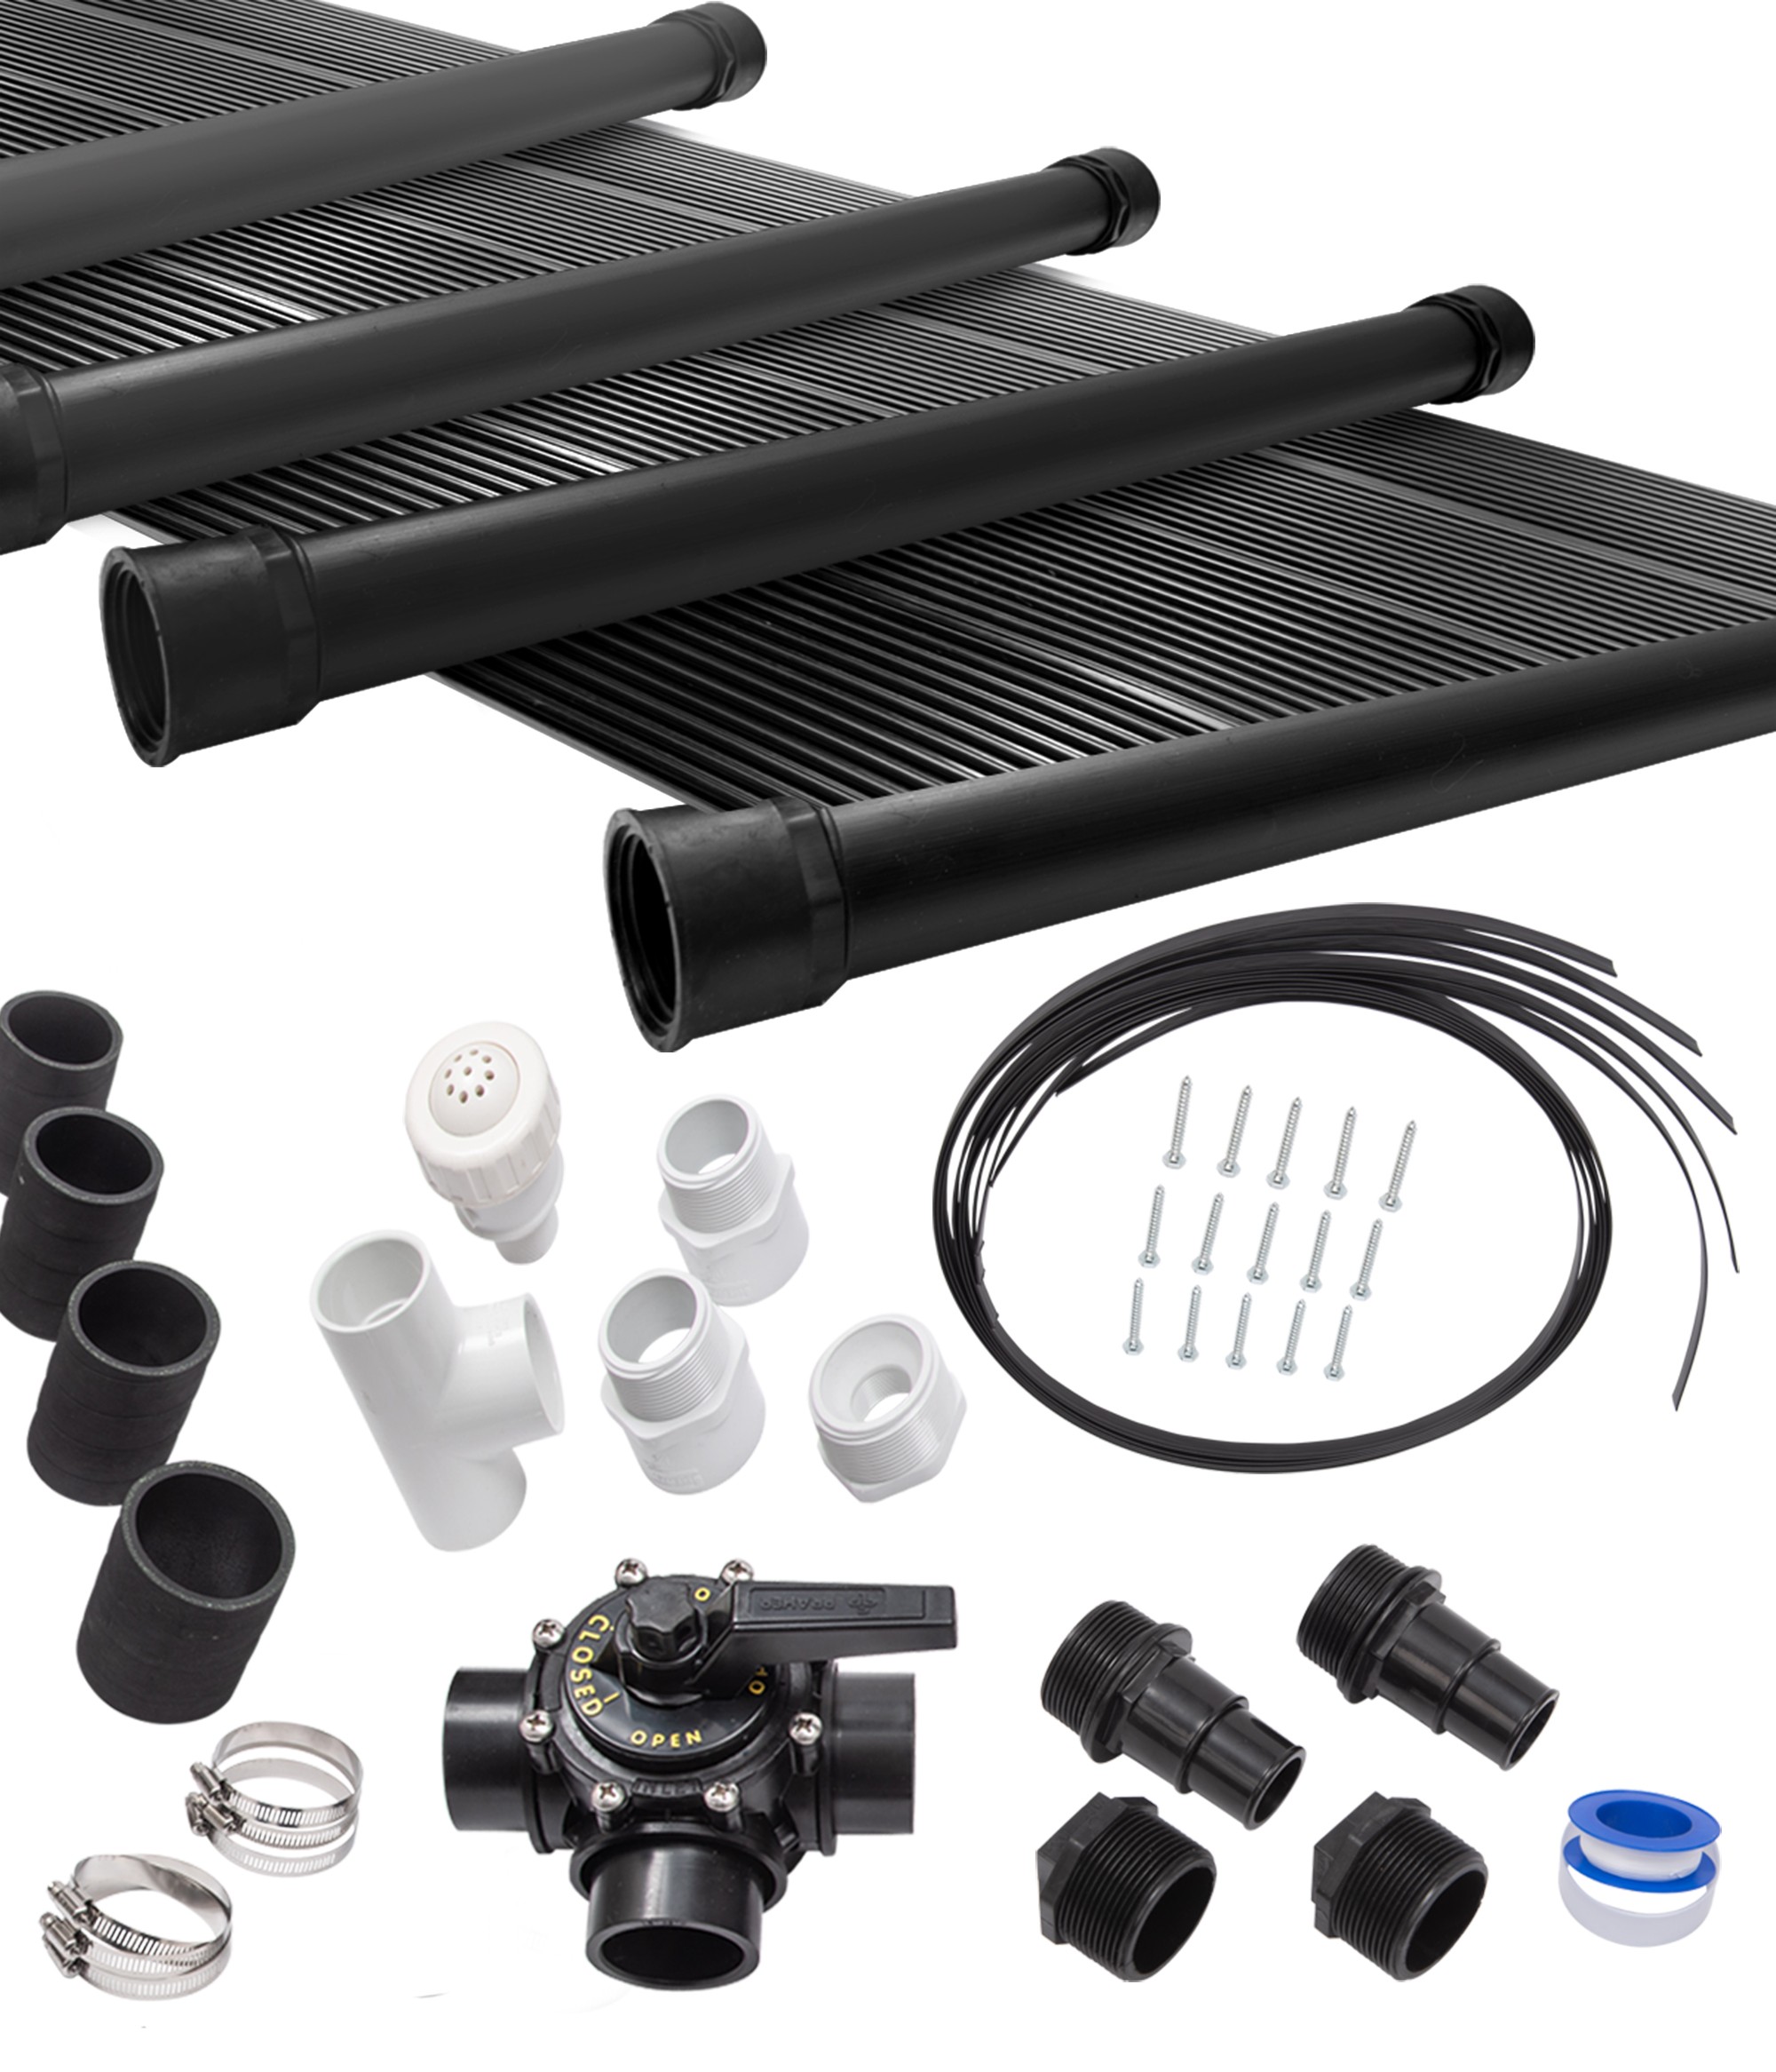 14-2X12' SunQuest Solar Swimming Pool Heater Complete System with Roof Kits